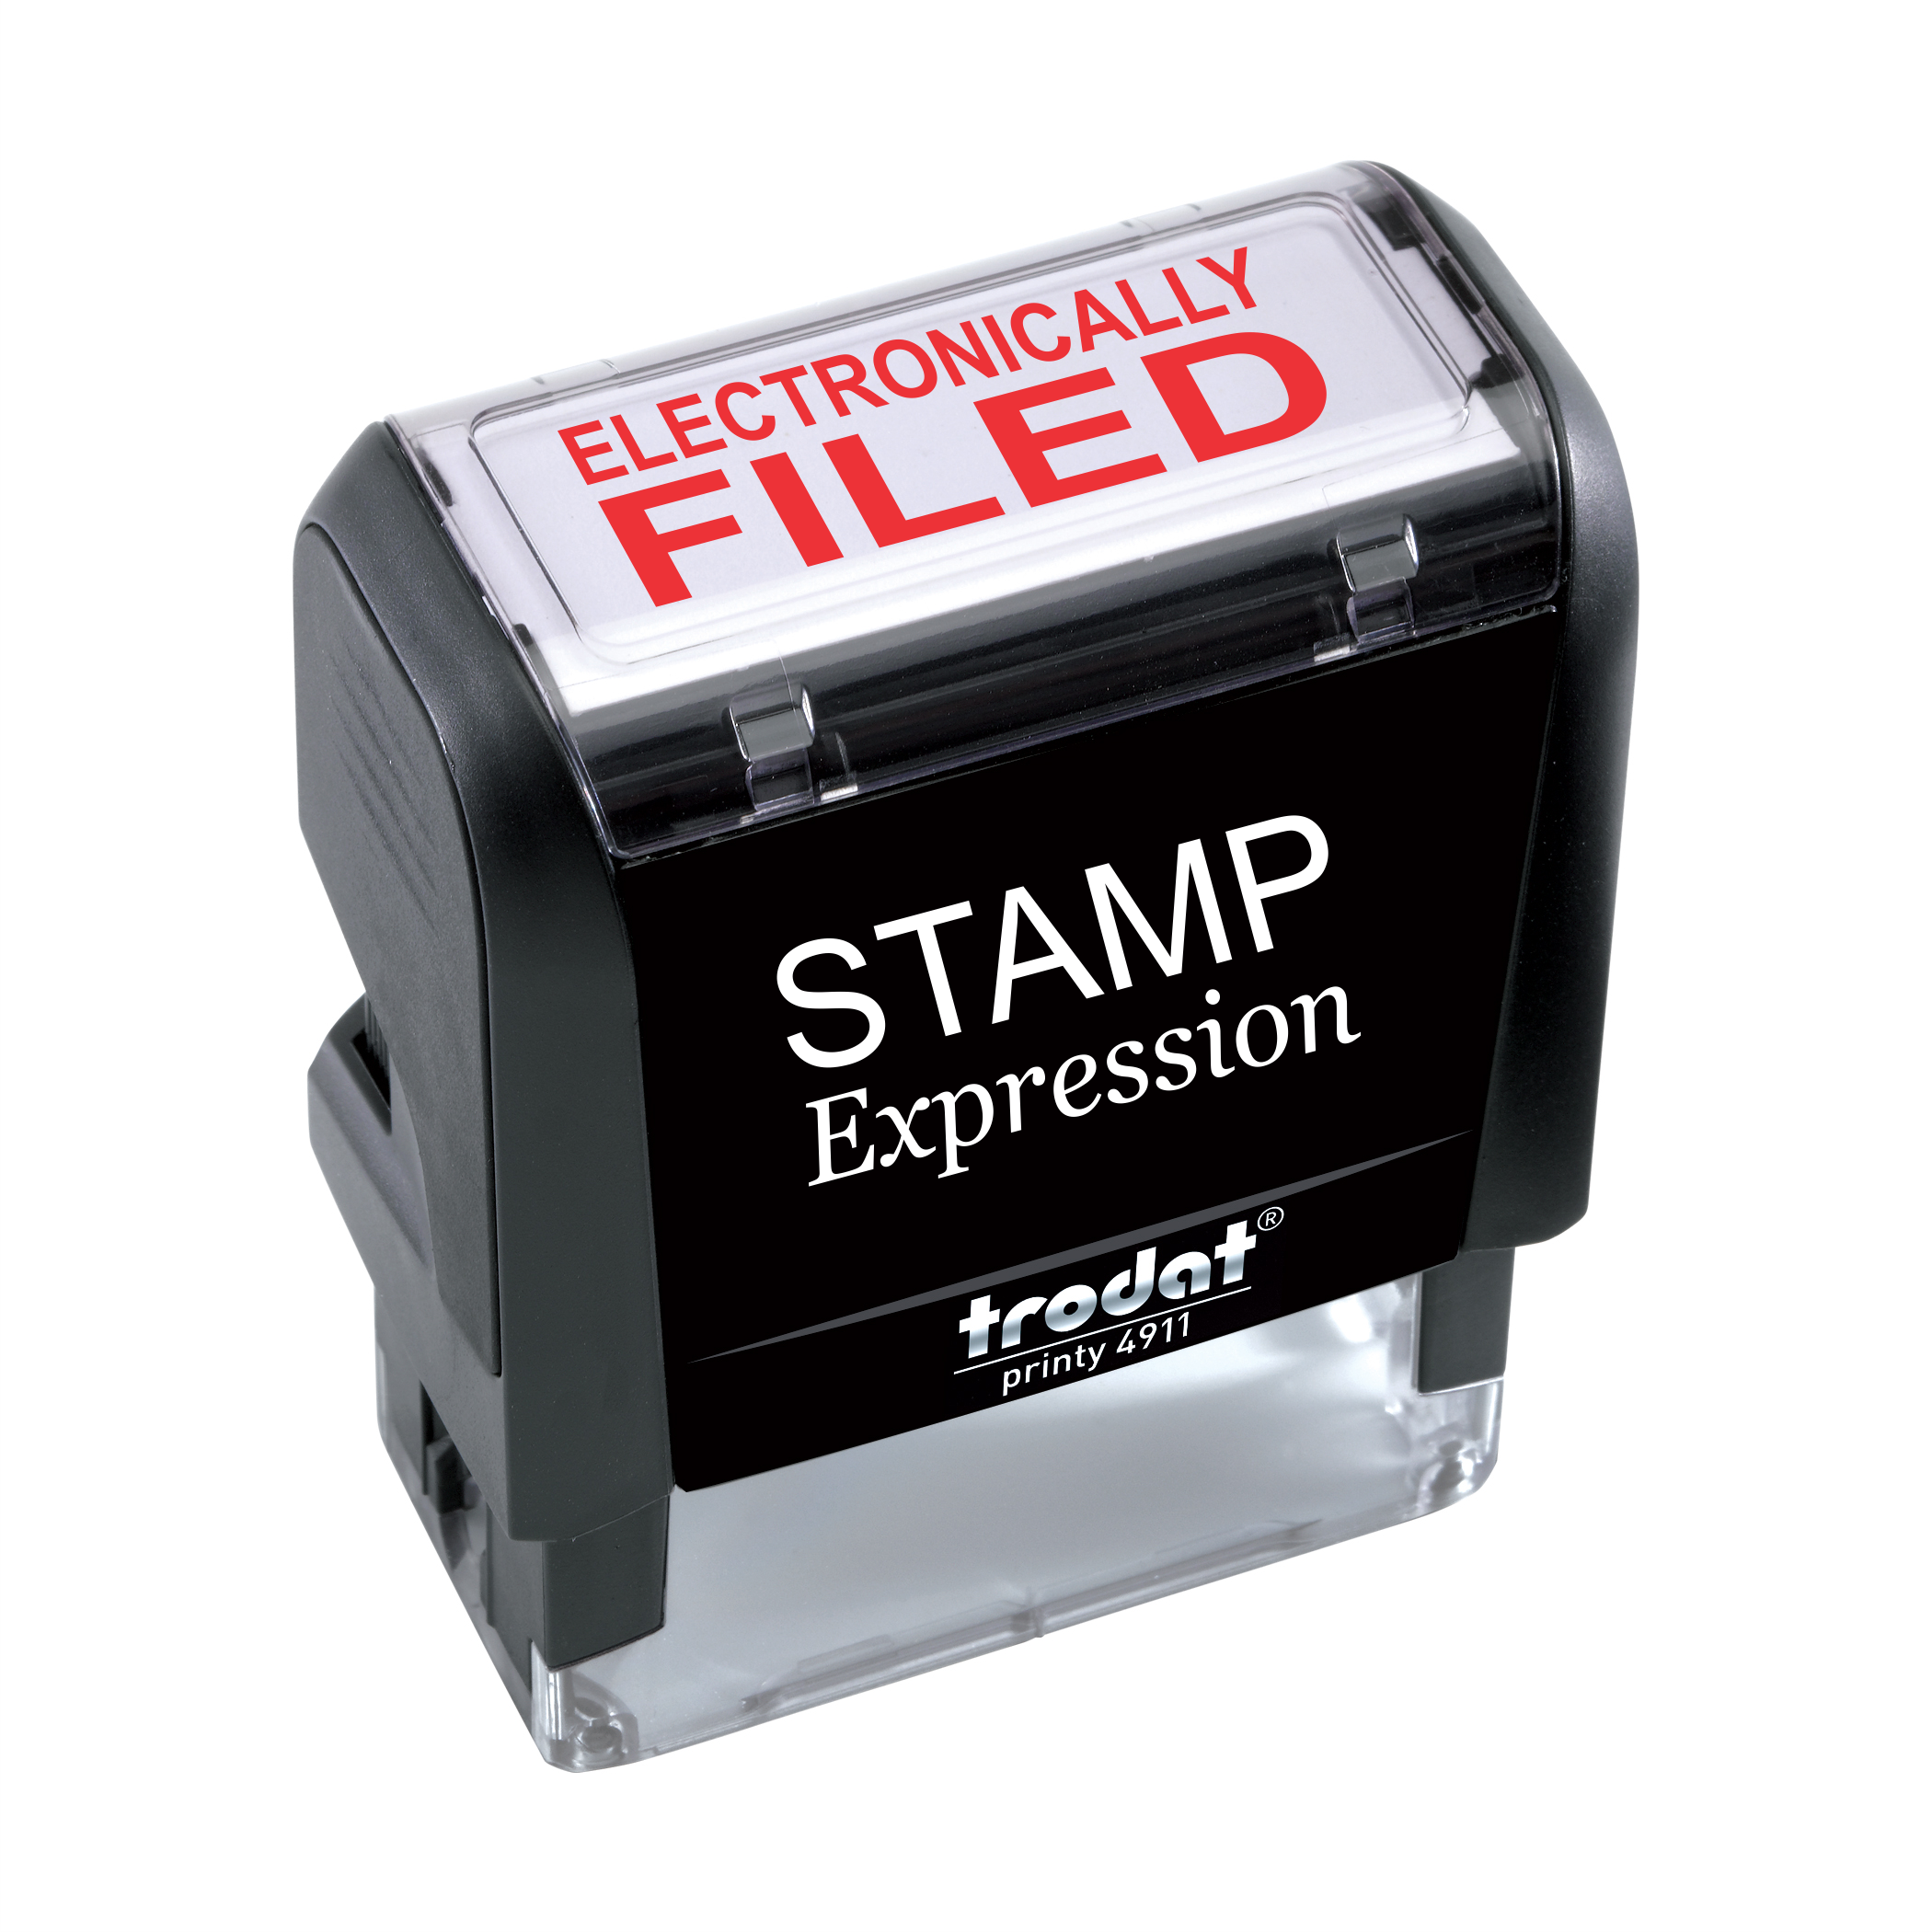 Electronically Filed Taxes Office Self Inking Rubber Stamp